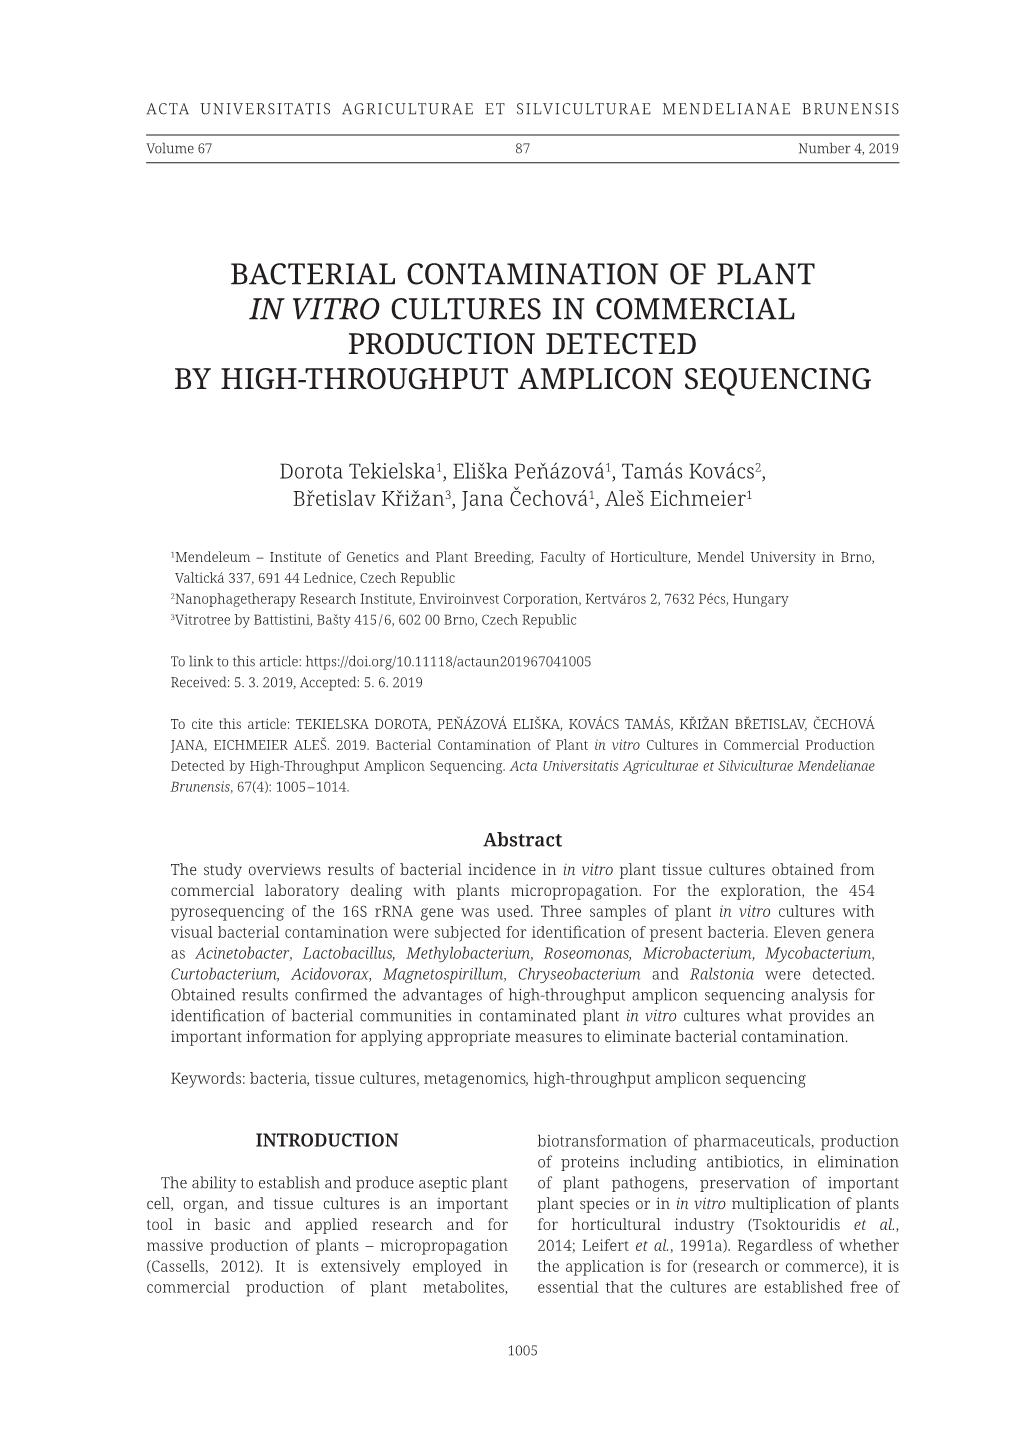 Bacterial Contamination of Plant in Vitro Cultures in Commercial Production Detected by High‑Throughput Amplicon Sequencing